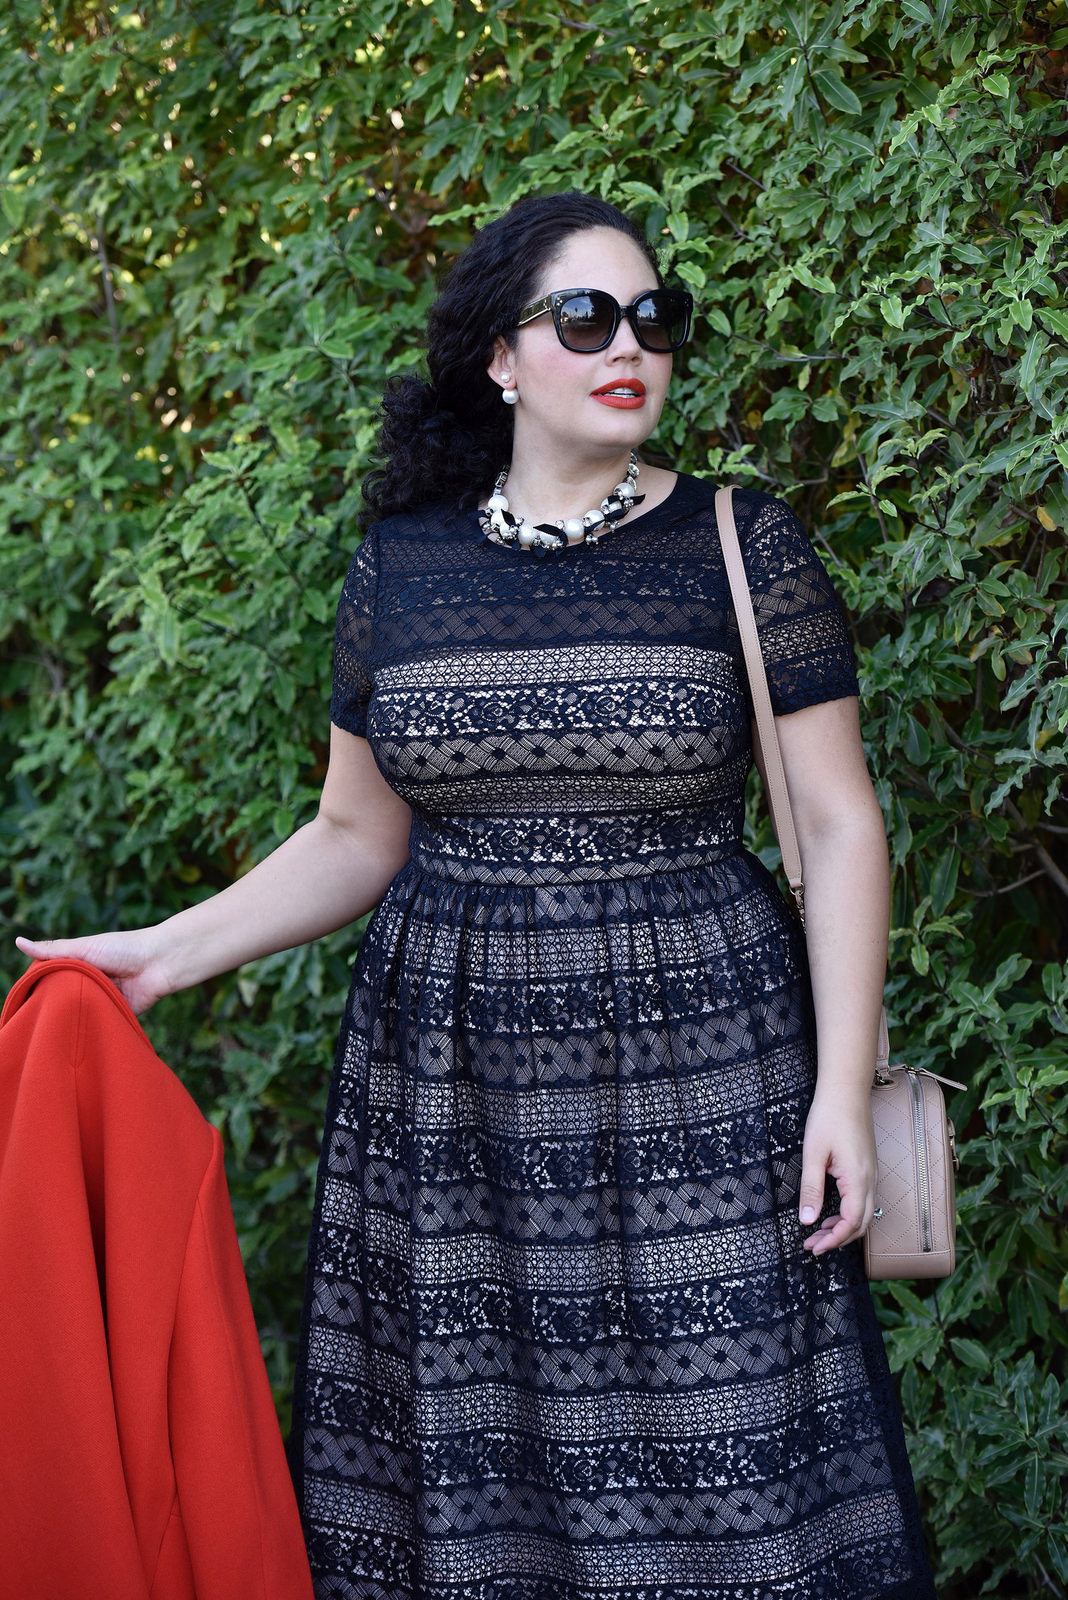 Girl With Curves wearing a pearl necklace from Ann Taylor, Audrey Sunglasses from Celine, Lace Dress from Maggy London at Nordstrom, Chanel bag.